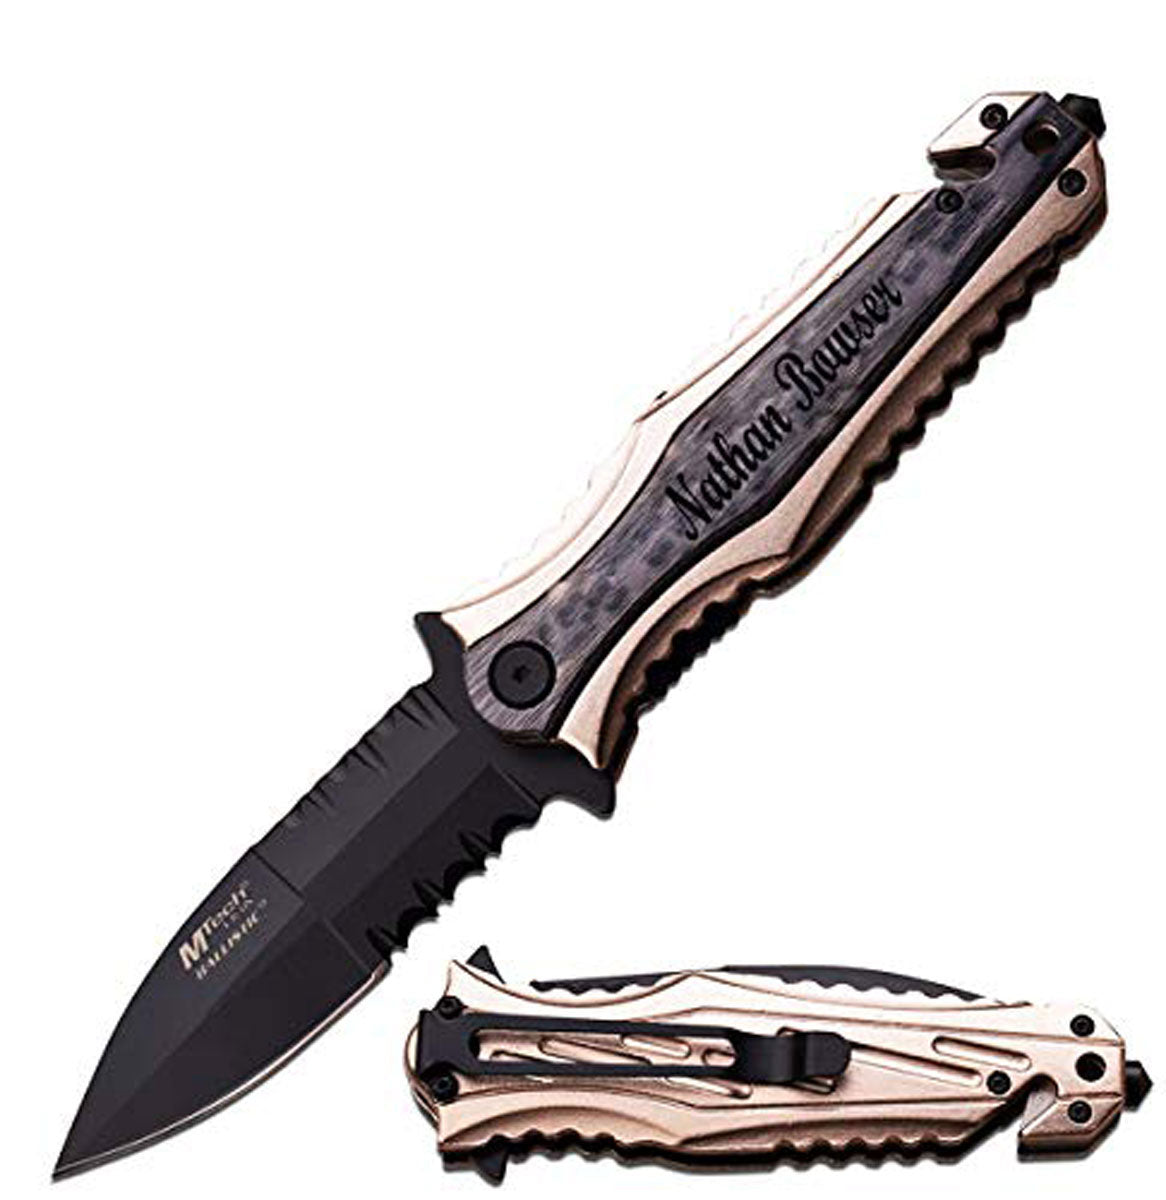 GIFTS INFINITY 5-in-1 Dispatcher 4.5" Tactical Knife with Glass Breaker, Seatbelt Cutter, Serrated Blade, Emergency Tool